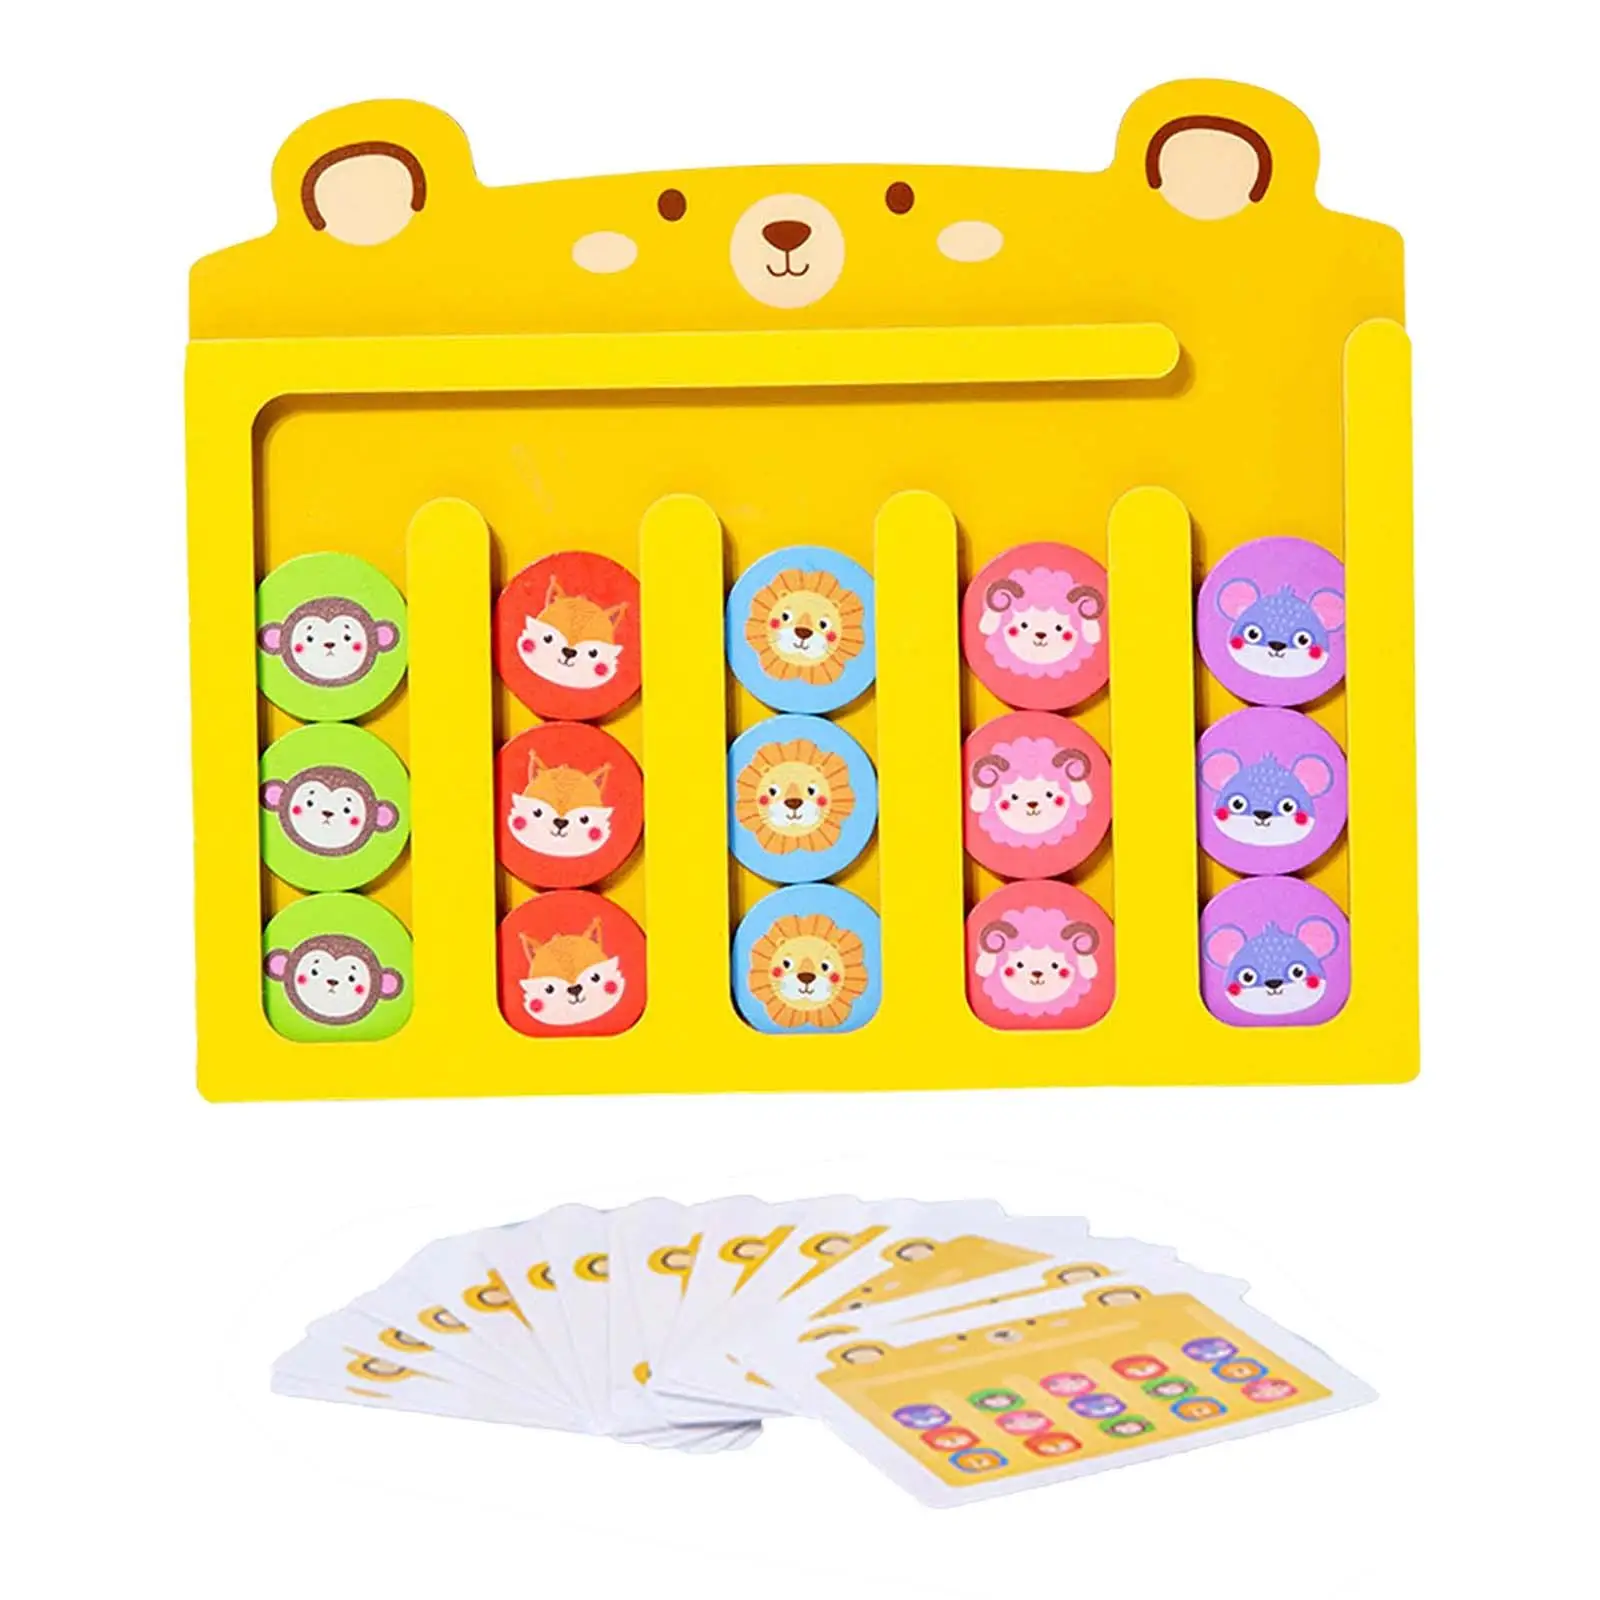 Slide Puzzle Color shape and Color Matching Puzzle for Sorting Colors and Shapes Sliding Puzzle Toy